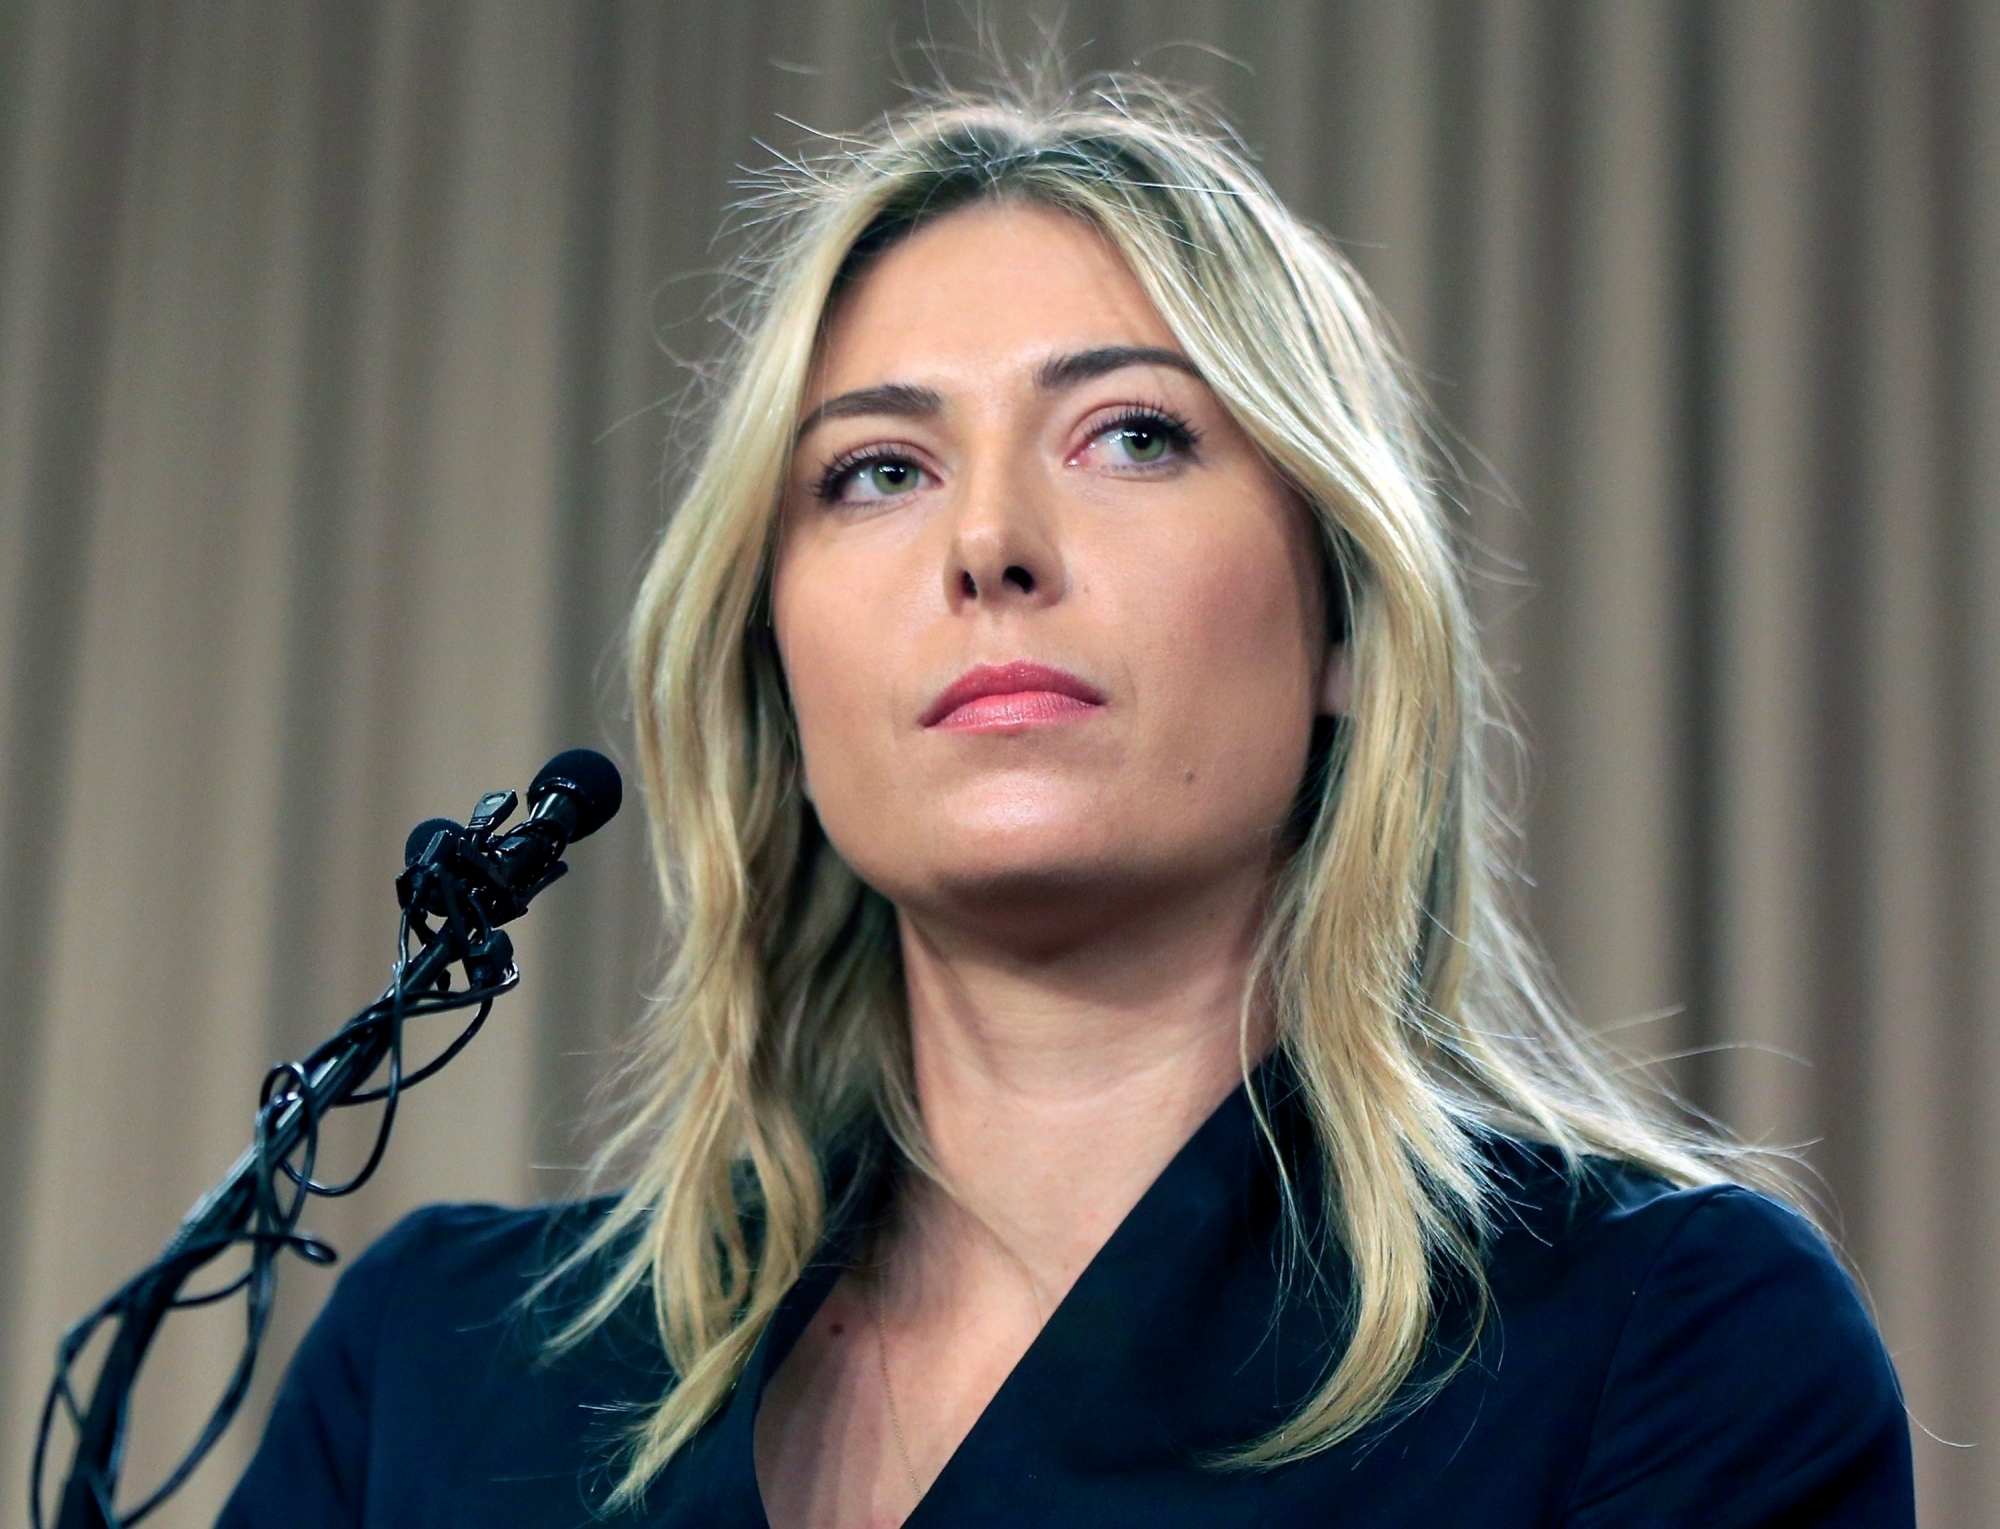 FILE - In this Monday March 7, 2016 file photo, tennis star Maria Sharapova speaks about her failed drug test at the Australia Open during a news conference in Los Angeles. Maria Sharapova will find out the week starting May 15, 2017, if she can compete at the French Open, the French Tennis Federation said. (AP Photo/Damian Dovarganes, File) French Open Sharapova